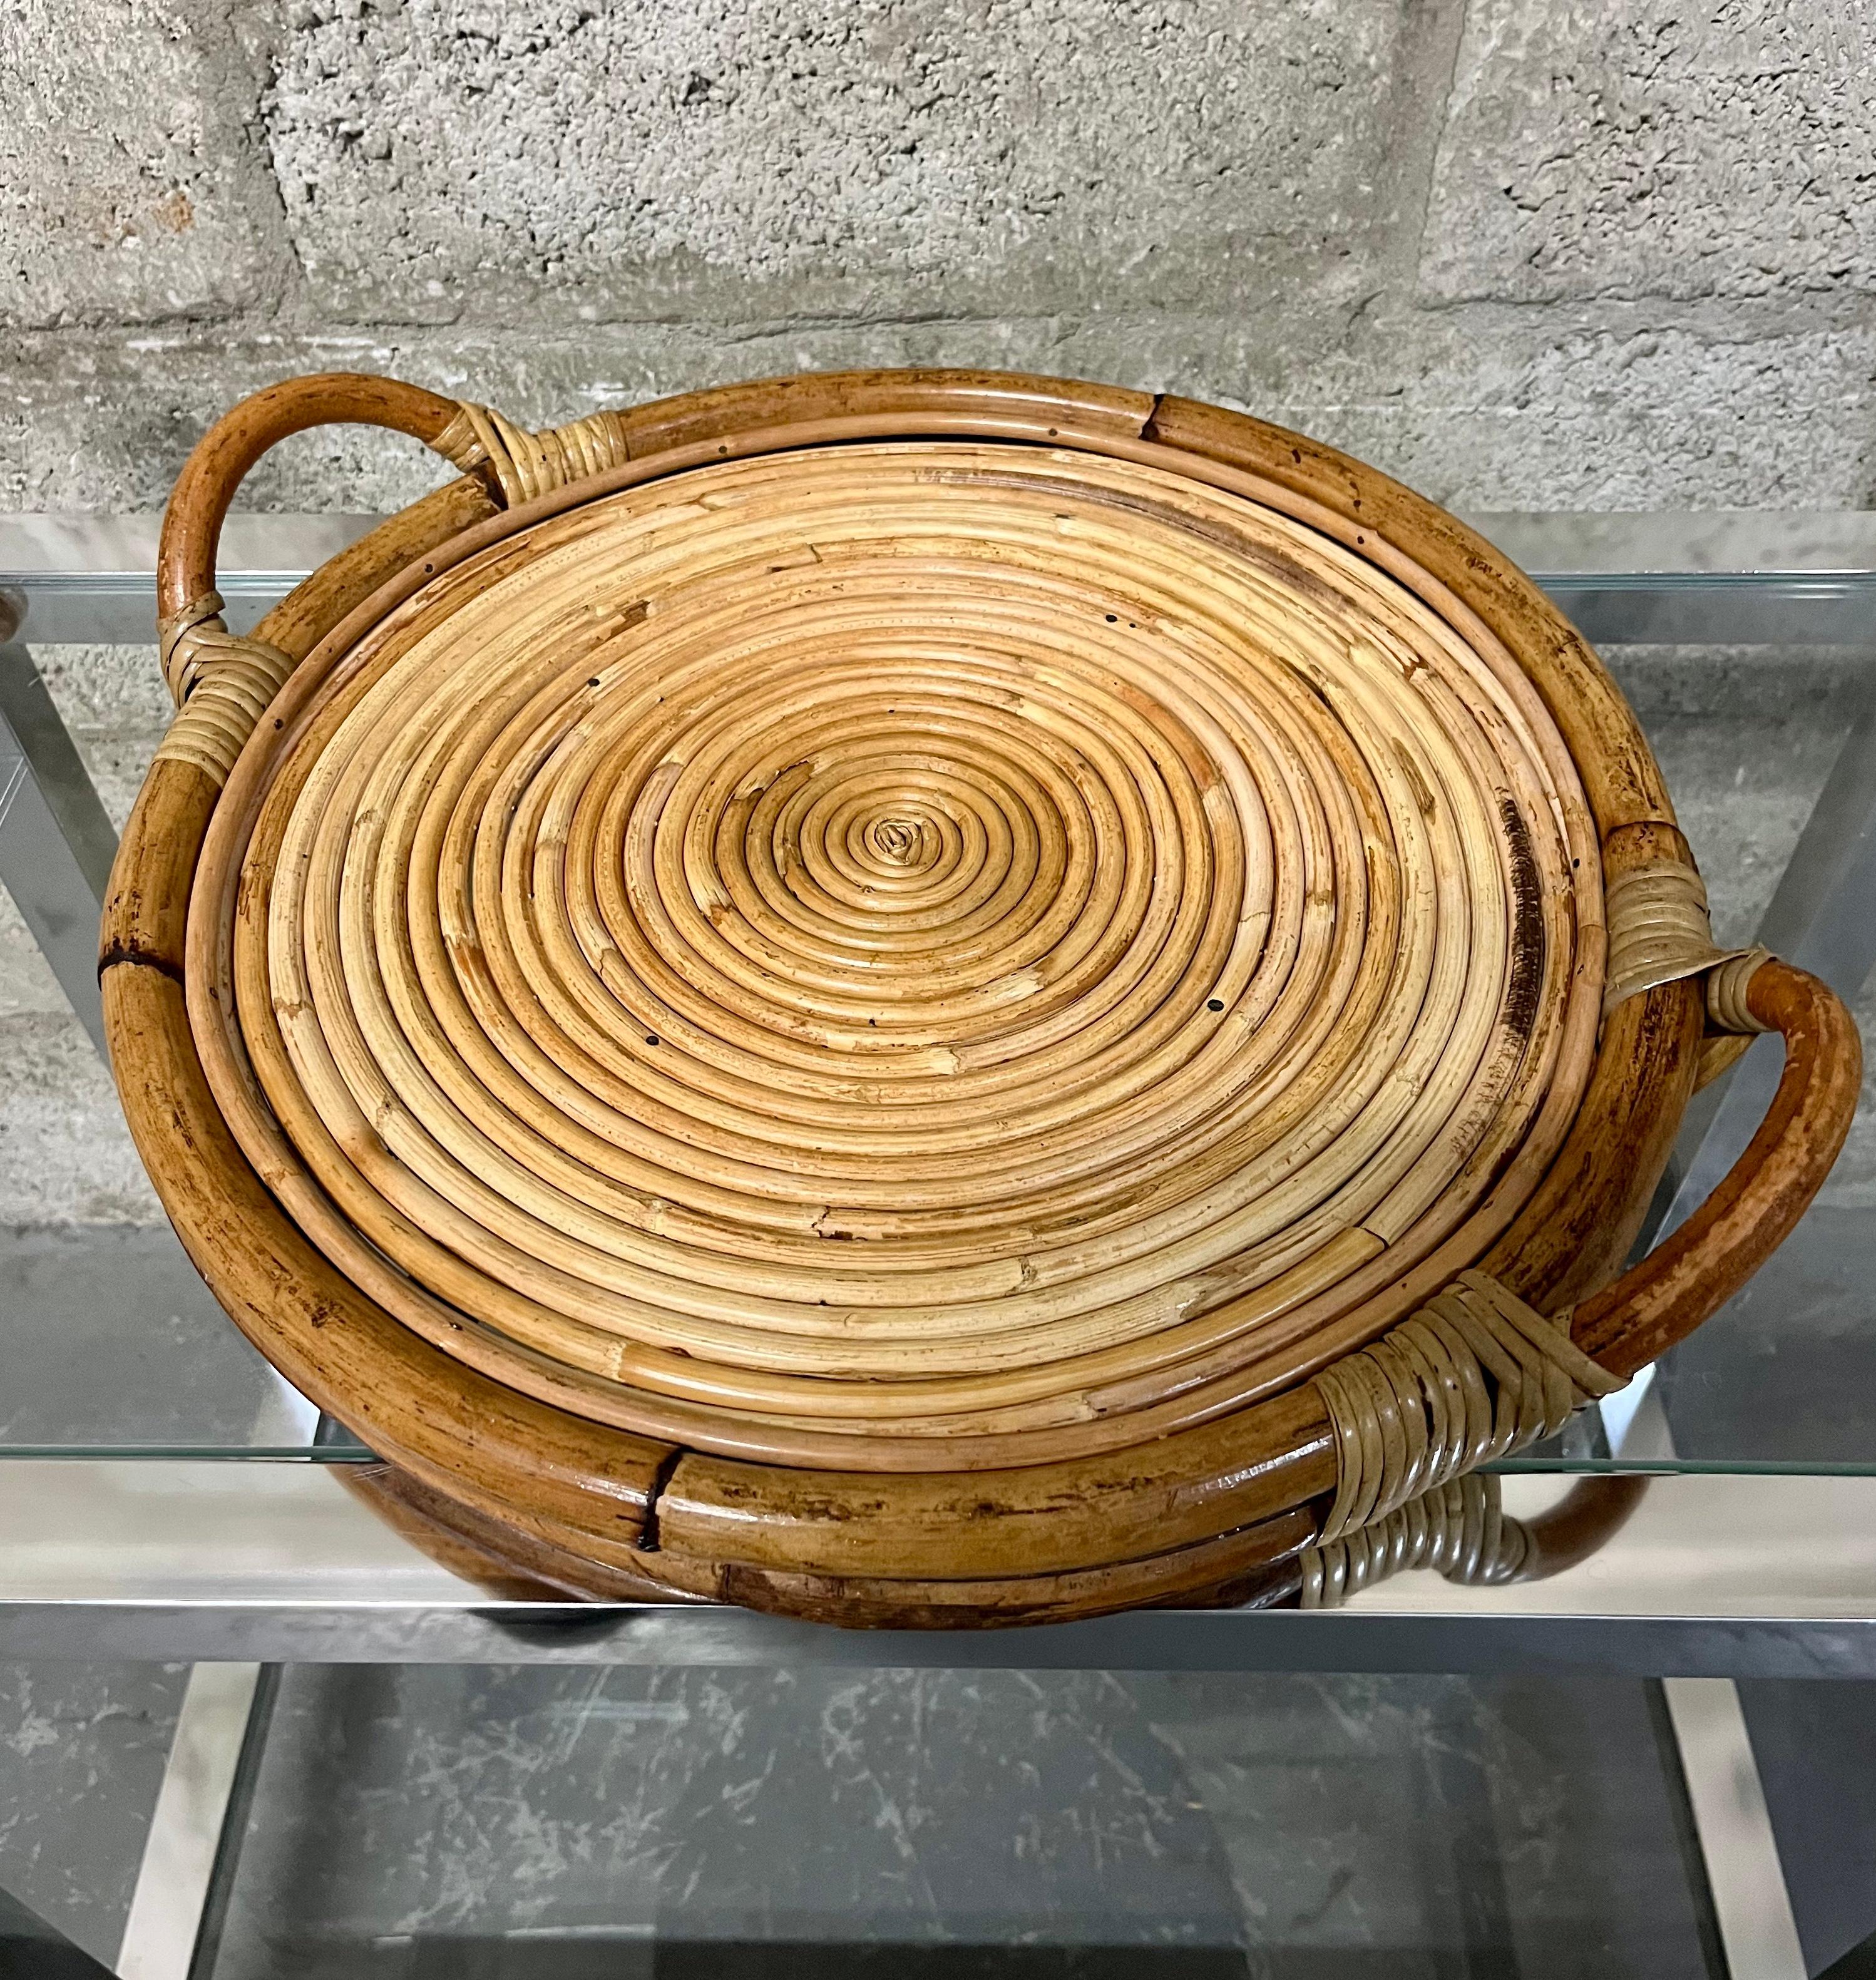 Vintage Coastal Style / Bohemian Pencil Reed Coiled Rattan Serving Tray. Circa 1980s
Features a split pencil reed rattan surface with chunky rattan trims and handles.
In excellent original condition with minor signs of wear and age. Please see close